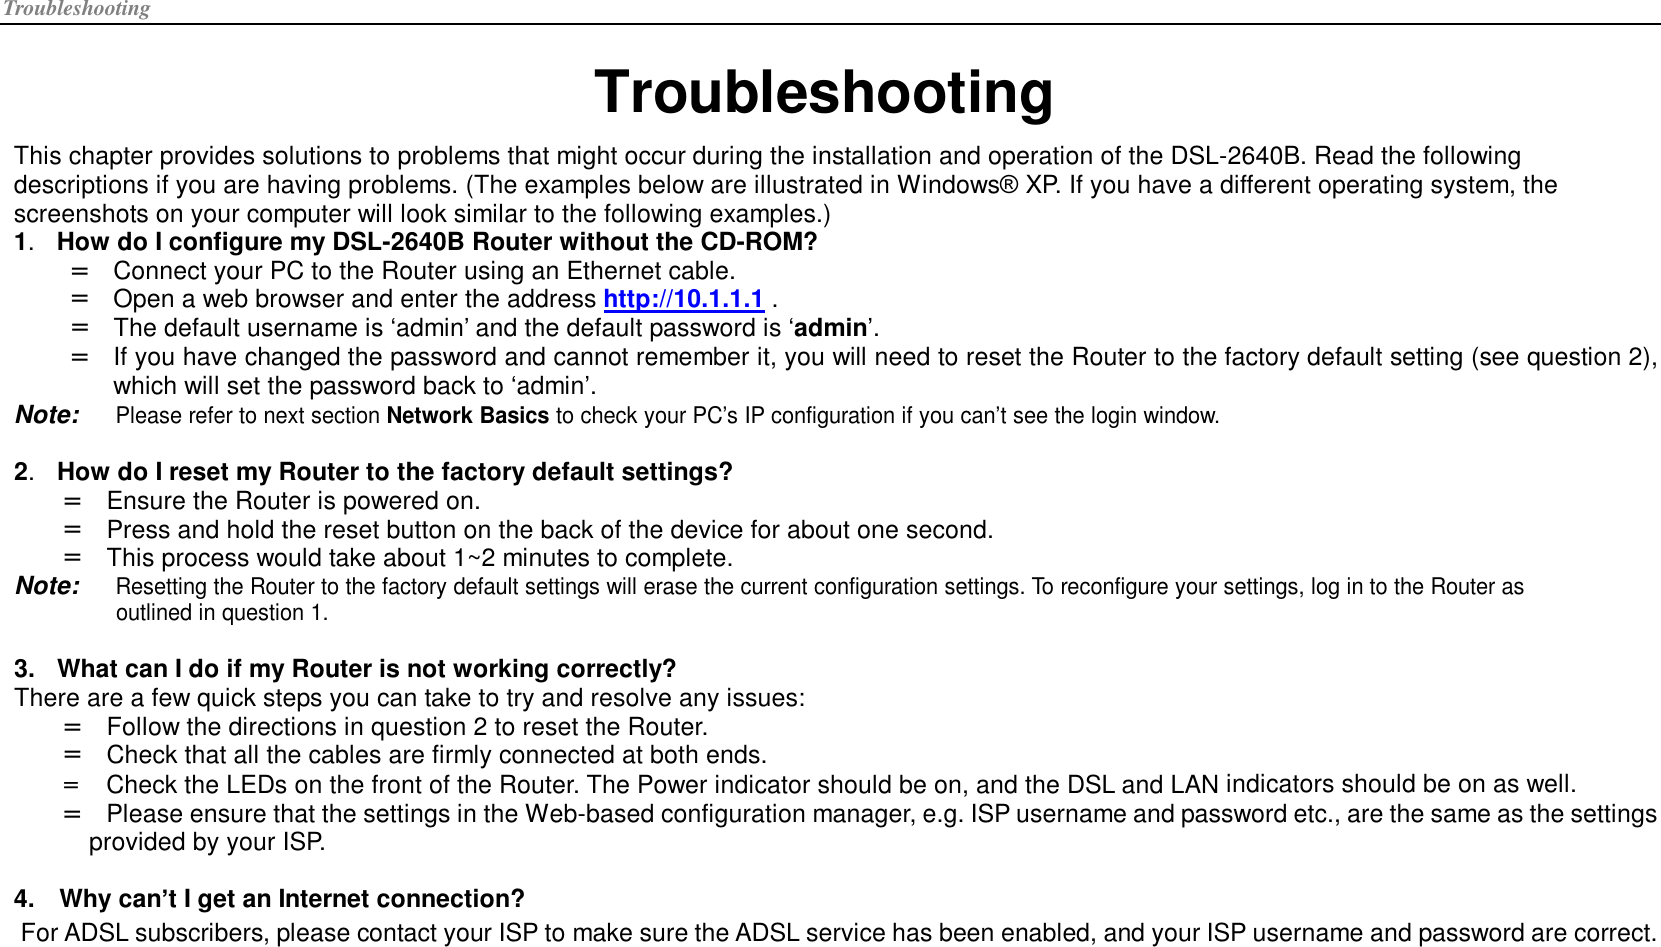 Troubleshooting Troubleshooting This chapter provides solutions to problems that might occur during the installation and operation of the DSL-2640B. Read the following descriptions if you are having problems. (The examples below are illustrated in Windows® XP. If you have a different operating system, the screenshots on your computer will look similar to the following examples.) 1.  How do I configure my DSL-2640B Router without the CD-ROM? =  Connect your PC to the Router using an Ethernet cable. =  Open a web browser and enter the address http://10.1.1.1 . =  The default username is ‘admin’ and the default password is ‘admin’. =  If you have changed the password and cannot remember it, you will need to reset the Router to the factory default setting (see question 2), which will set the password back to ‘admin’. Note: Please refer to next section Network Basics to check your PC’s IP configuration if you can’t see the login window.  2.  How do I reset my Router to the factory default settings? =  Ensure the Router is powered on. =  Press and hold the reset button on the back of the device for about one second. =  This process would take about 1~2 minutes to complete. Note: Resetting the Router to the factory default settings will erase the current configuration settings. To reconfigure your settings, log in to the Router as outlined in question 1.  3. What can I do if my Router is not working correctly? There are a few quick steps you can take to try and resolve any issues: =  Follow the directions in question 2 to reset the Router. =  Check that all the cables are firmly connected at both ends. =  Check the LEDs on the front of the Router. The Power indicator should be on, and the DSL and LAN indicators should be on as well. =  Please ensure that the settings in the Web-based configuration manager, e.g. ISP username and password etc., are the same as the settings provided by your ISP.  4. Why can’t I get an Internet connection? For ADSL subscribers, please contact your ISP to make sure the ADSL service has been enabled, and your ISP username and password are correct. 